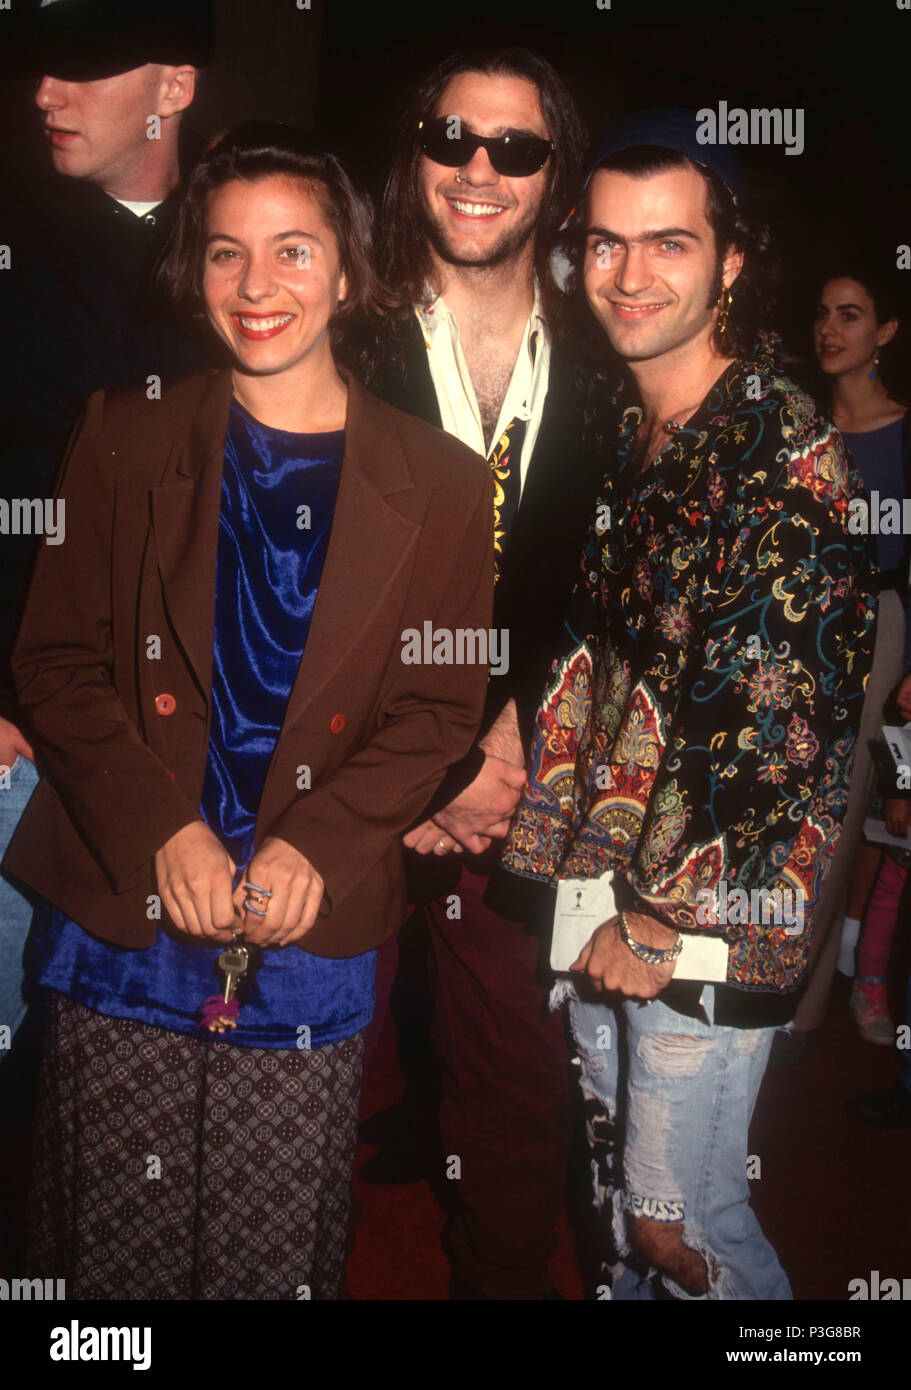 LOS ANGELES, CA - NOVEMBER 3: (L-R) Actress Moon Zappa, brothers musicians Ahmet Zappa and Dweezil Zappa attend the 'My Girl' Century City Premiere on November 3, 1991 at Cineplex Odeon Century Plaza Cinemas in Century City, Los Angeles, California. Photo by Barry King/Alamy Stock Photo Stock Photo